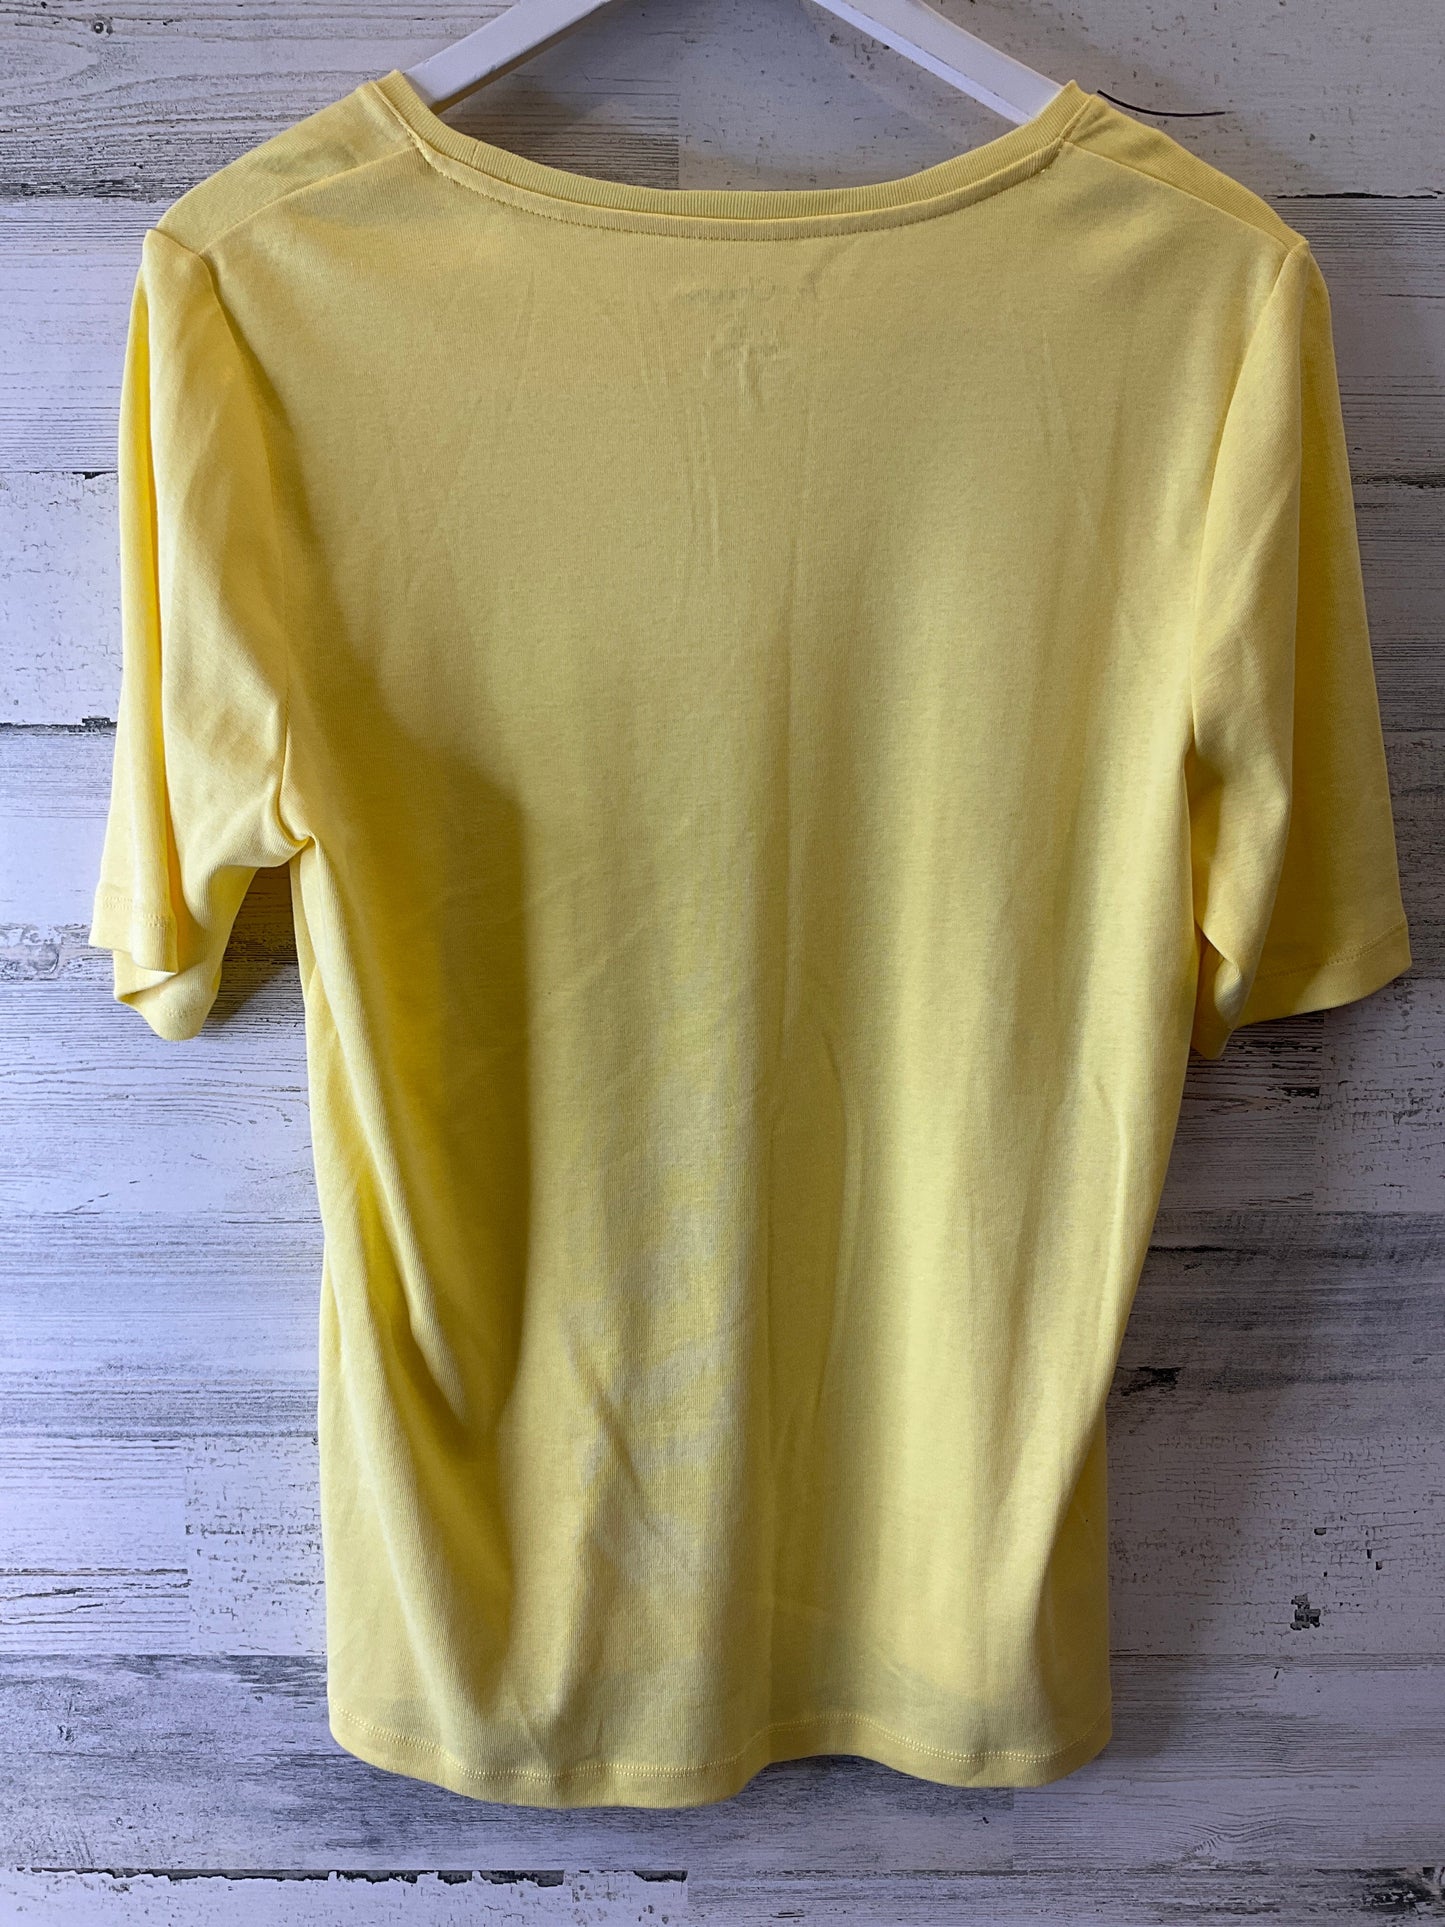 Yellow Top Short Sleeve Chicos, Size L